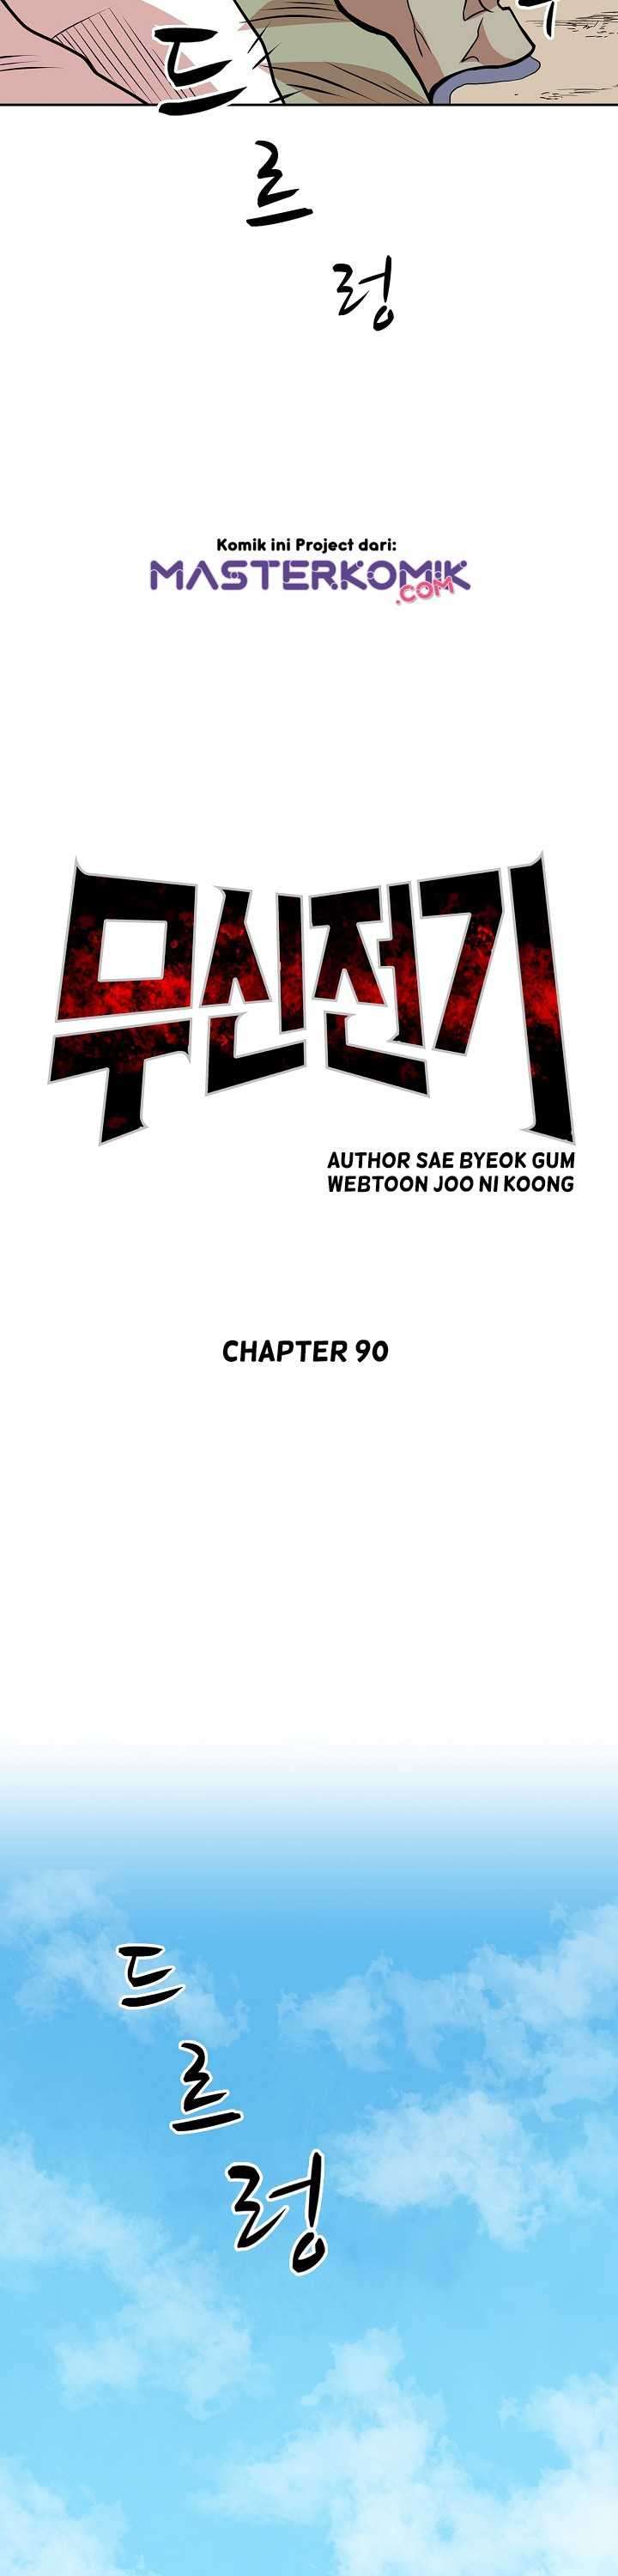 Record of the War God Chapter 90